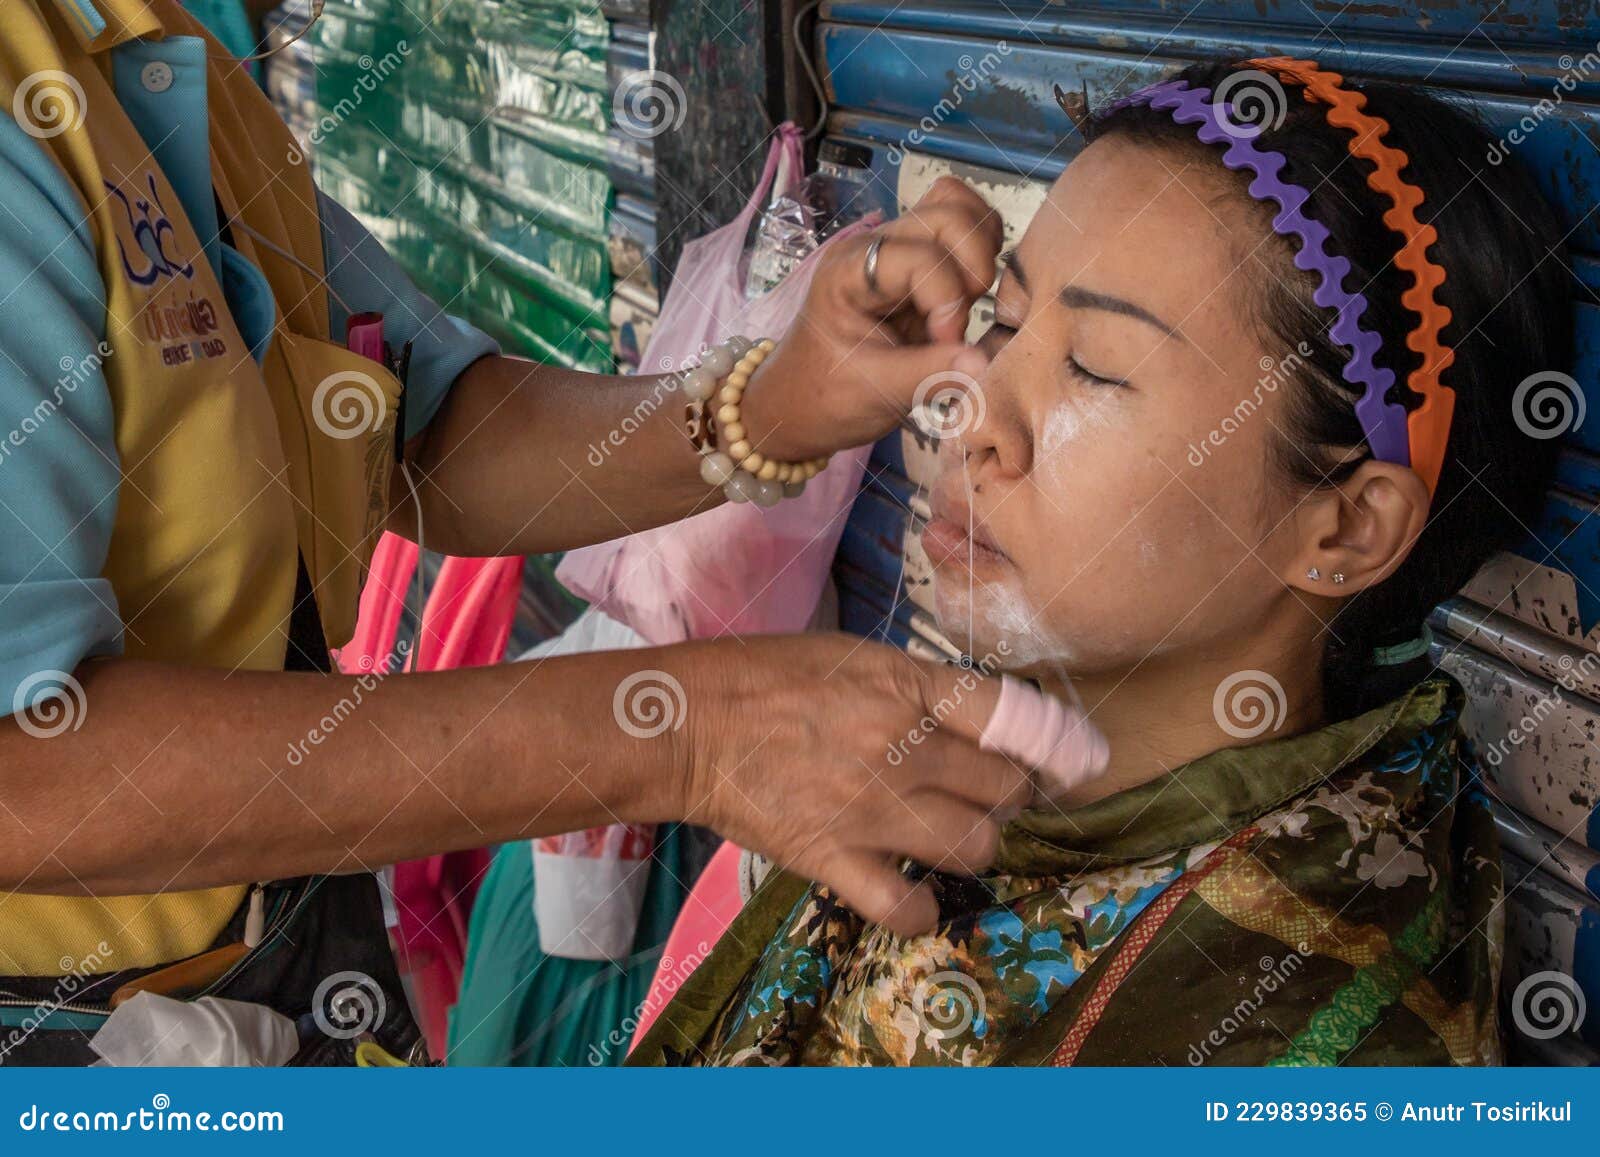 i_we_and_the_baby - Mundan ceremony or baby's first head shaving ceremony  is a very common ritual amongst Hindus. It is considered to be pious to  remove baby's birth hair after certain age. It